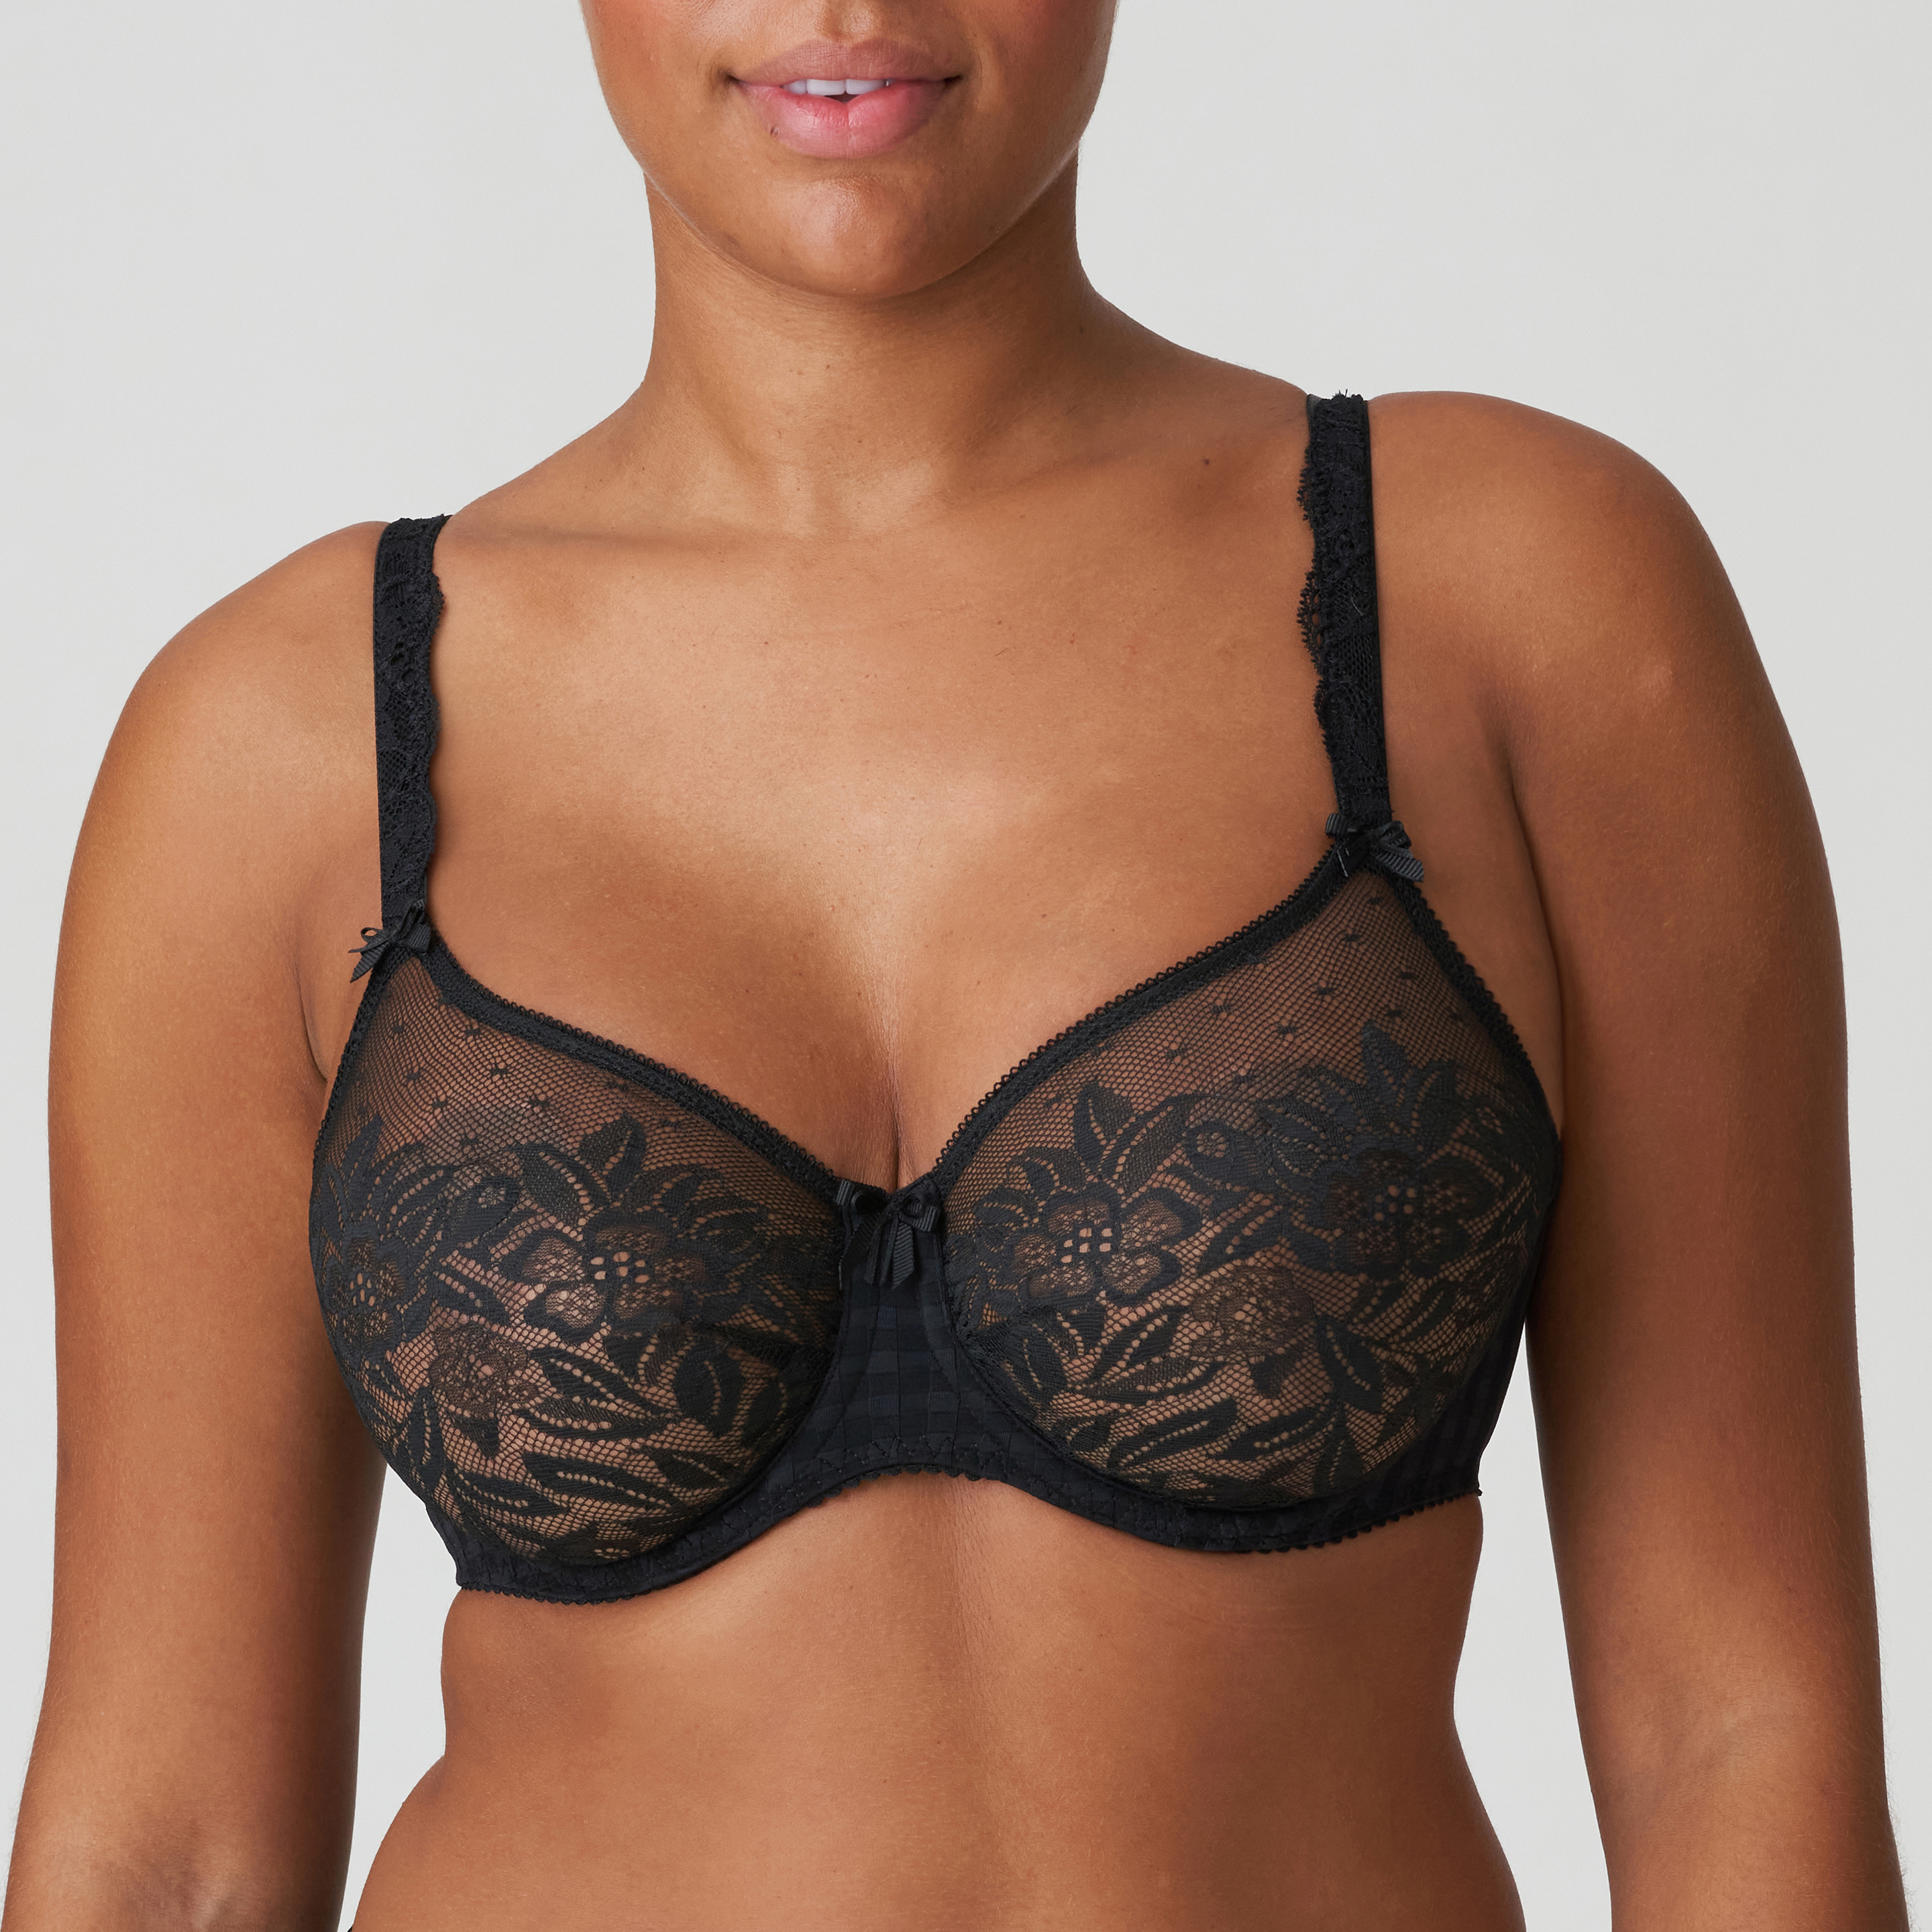 PRIMA DONNA Ebony Every Woman Spacer Full Cup Bra, US 32G, UK 32F, NWOT